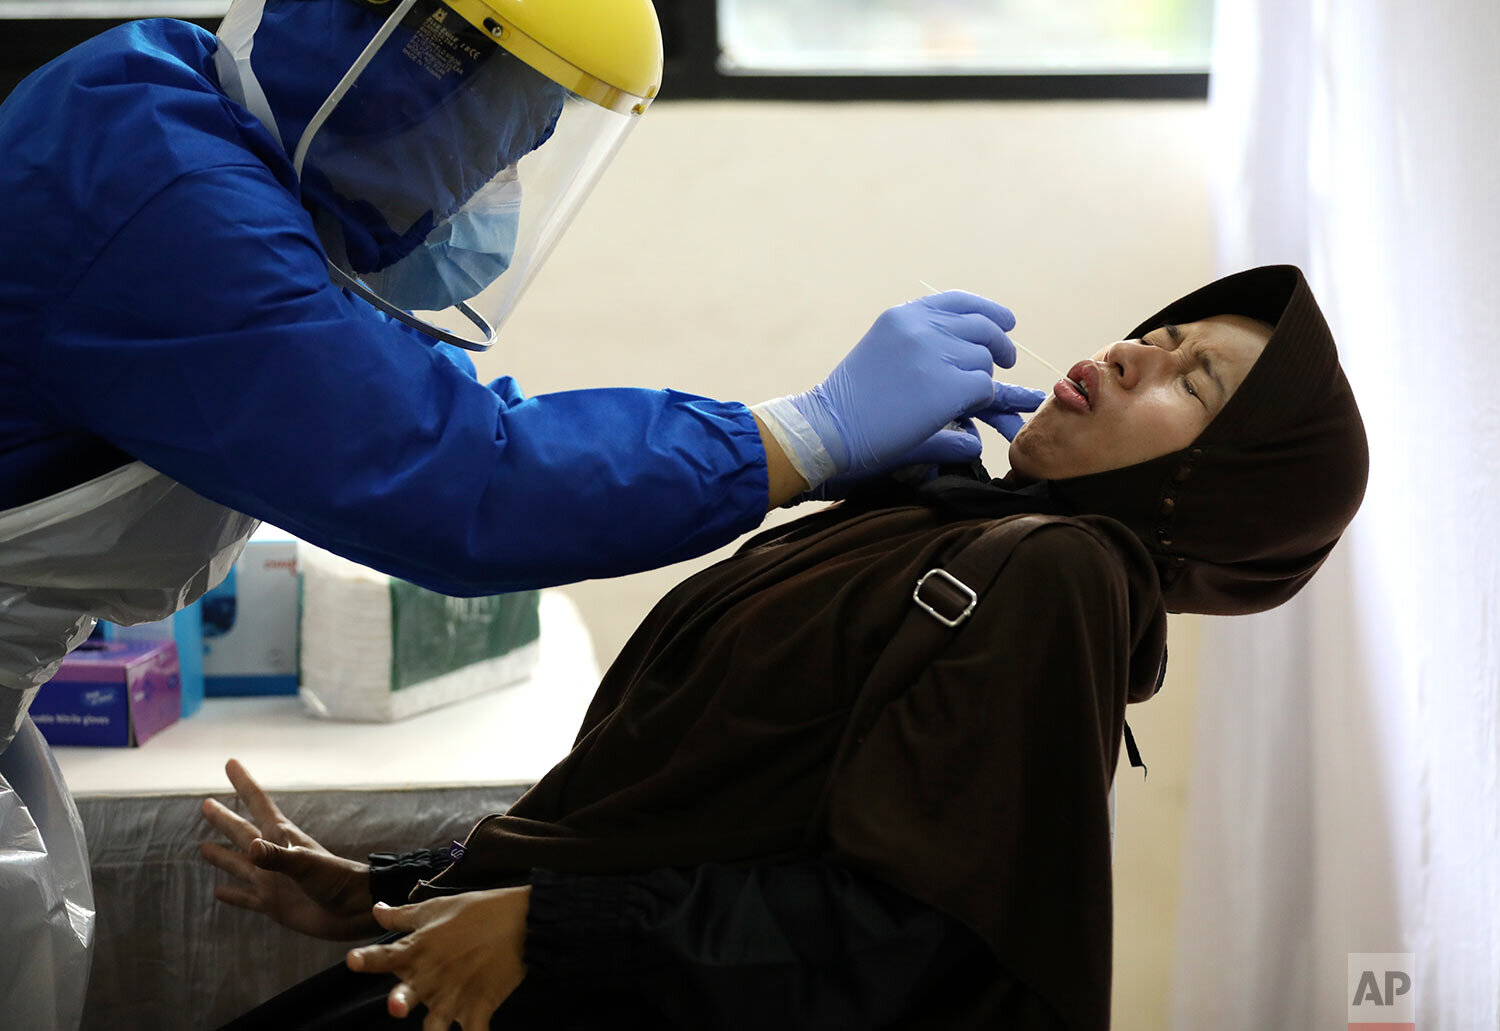  A woman reacts as she has her nasal swab sample collected by a health worker during a mass test for the new coronavirus at the local district office in Tanah Abang in Jakarta, Indonesia, Sunday, June 21, 2020. (AP Photo/Dita Alangkara) 